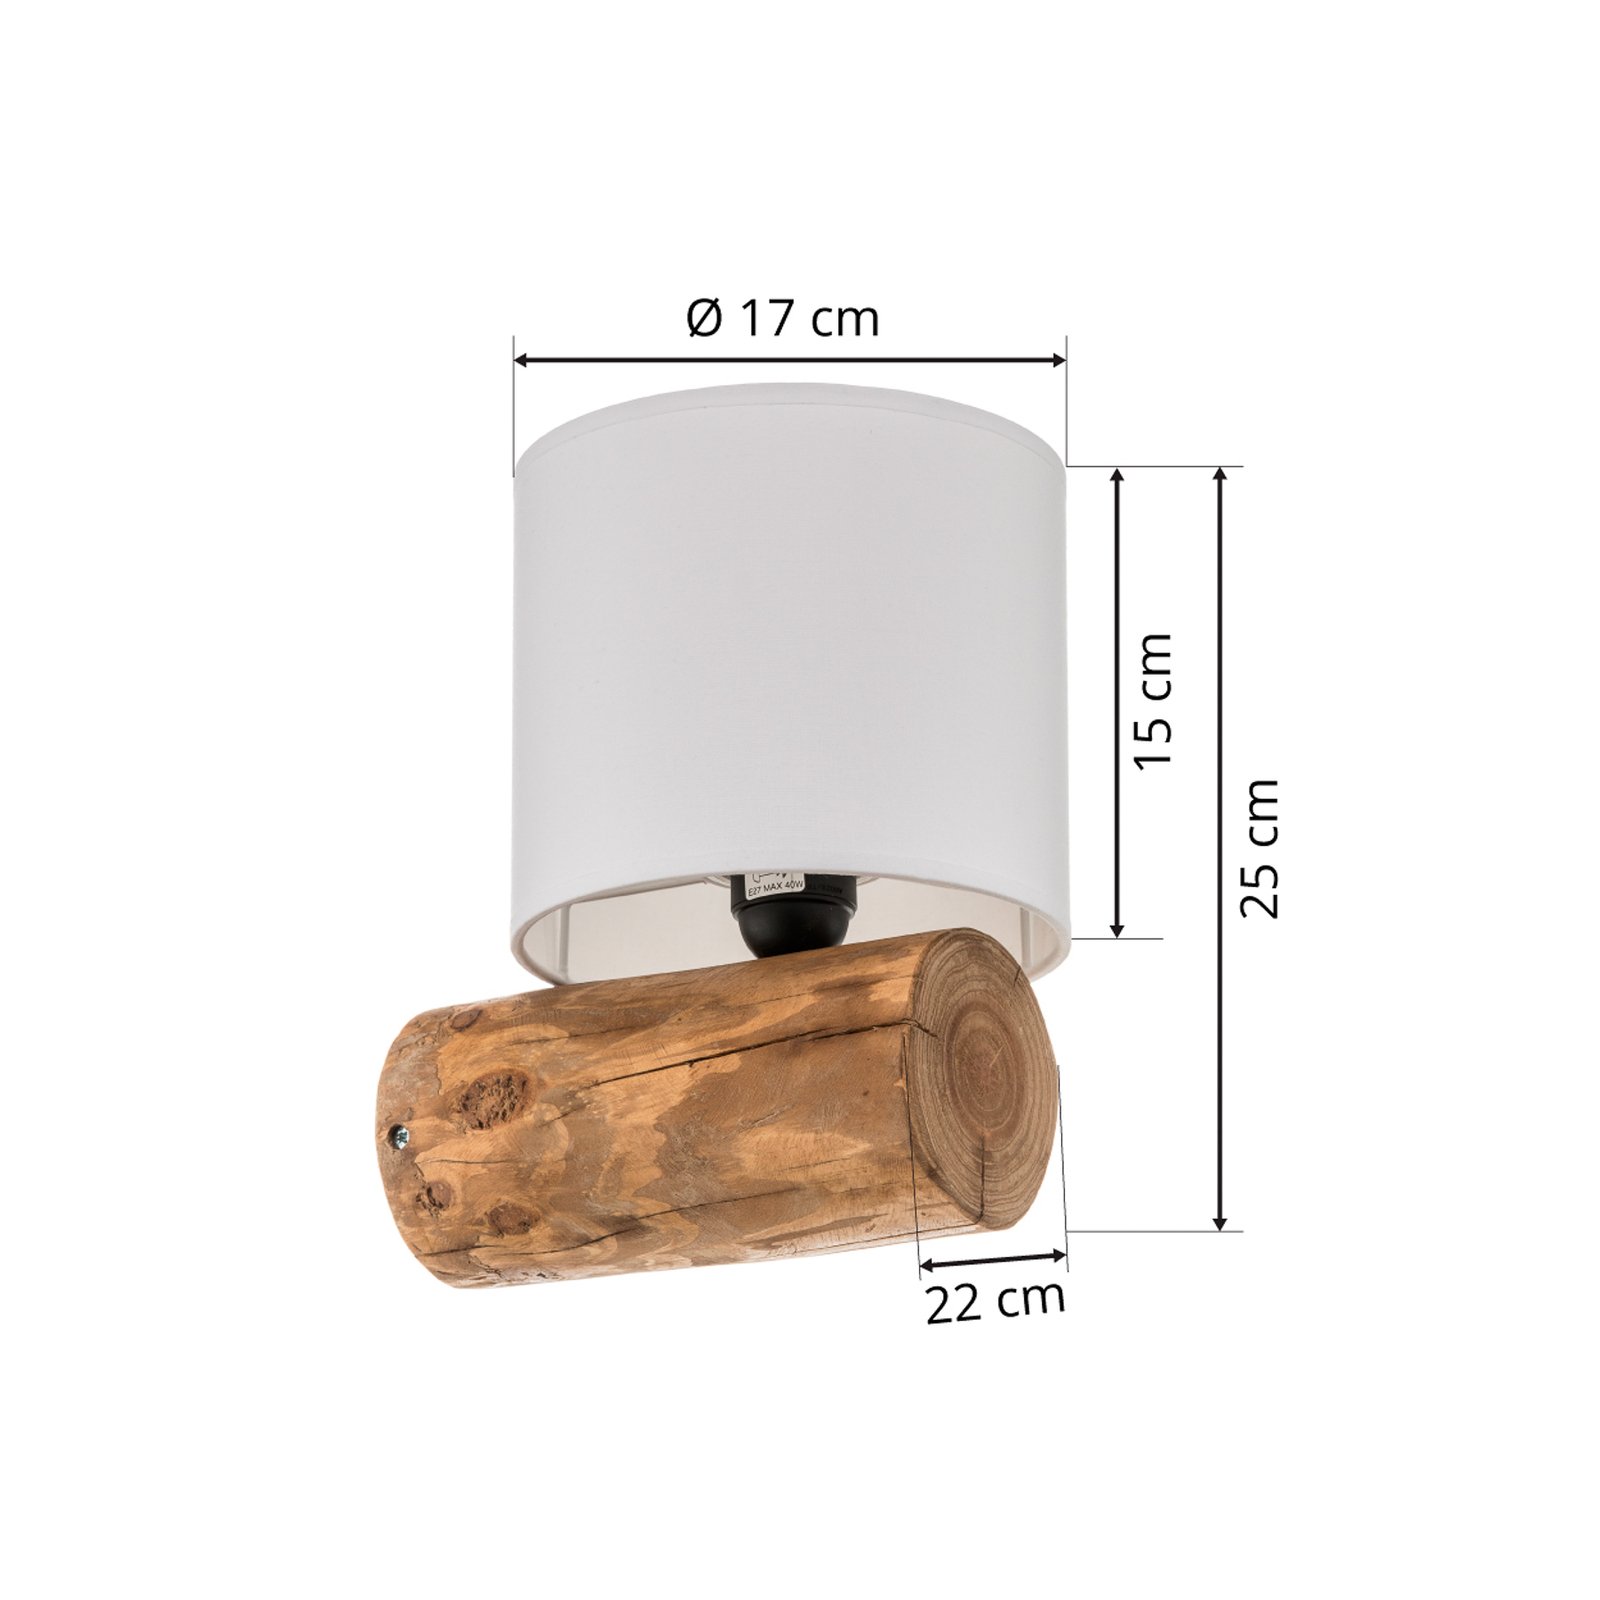 Pino Simple wall light white lampshade brown frame